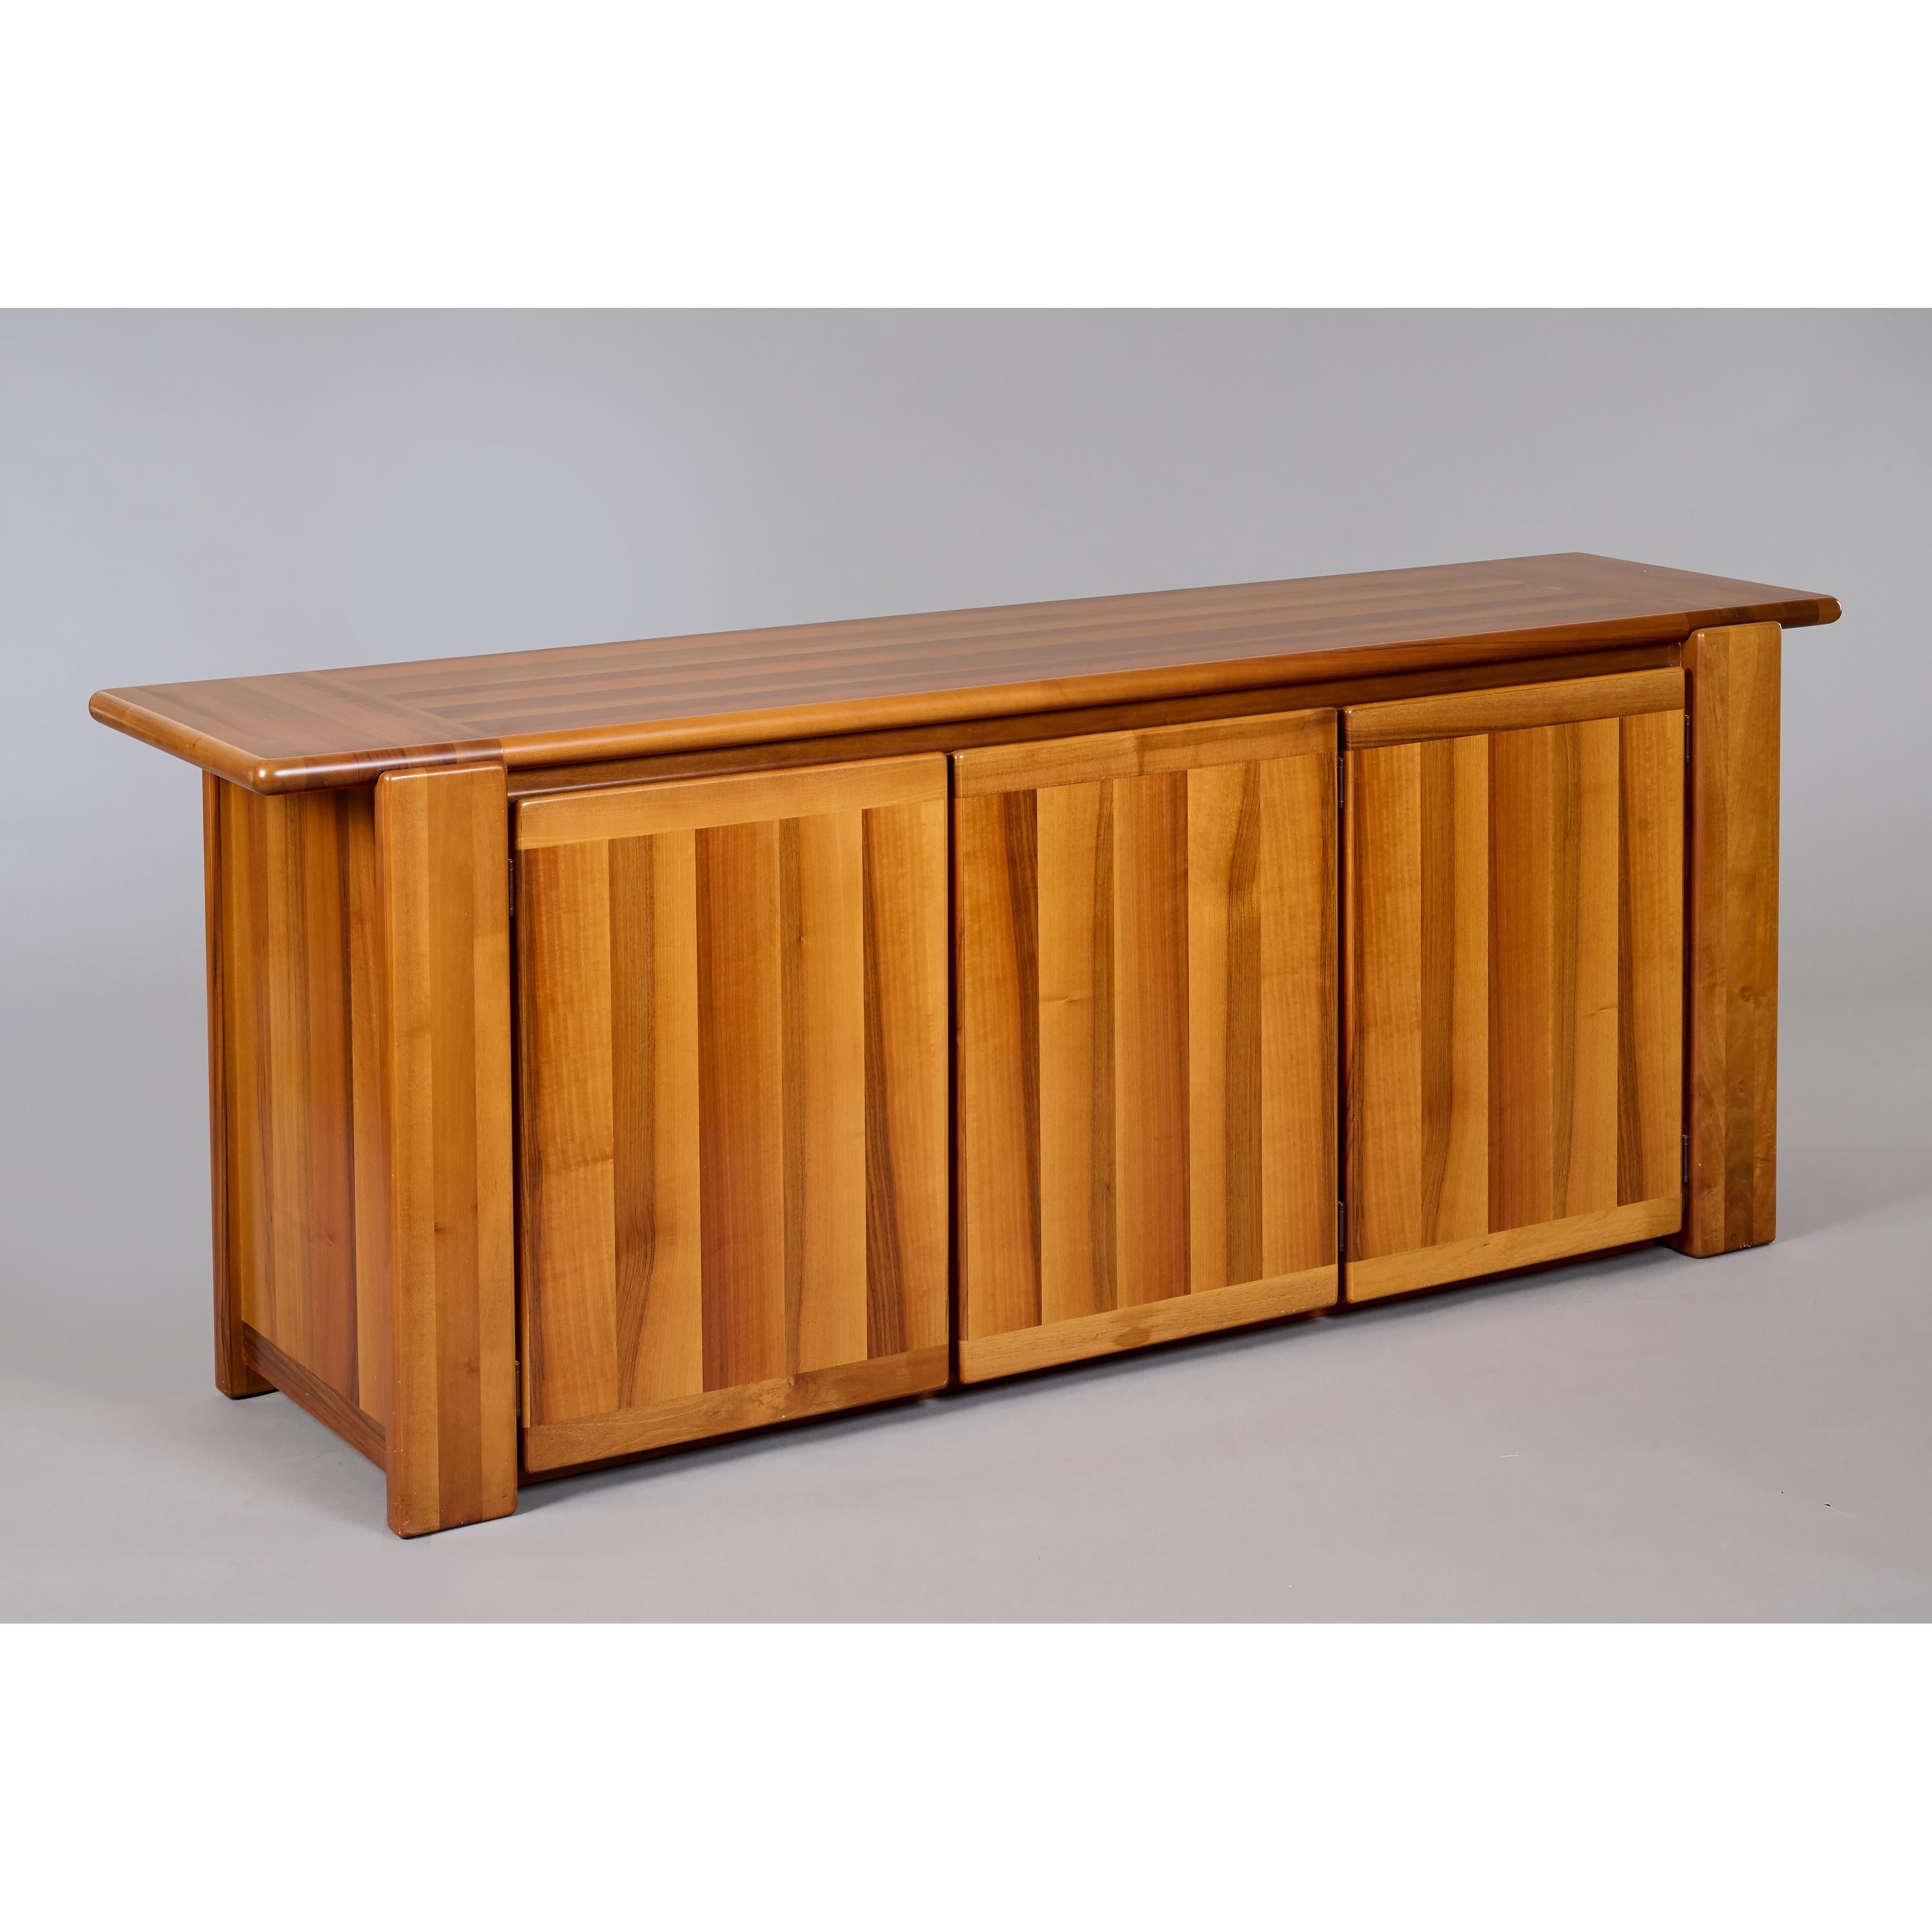 Late 20th Century Italian Cabinet in Polished Walnut, Itso Pierre Chapo, Italy 1970s For Sale